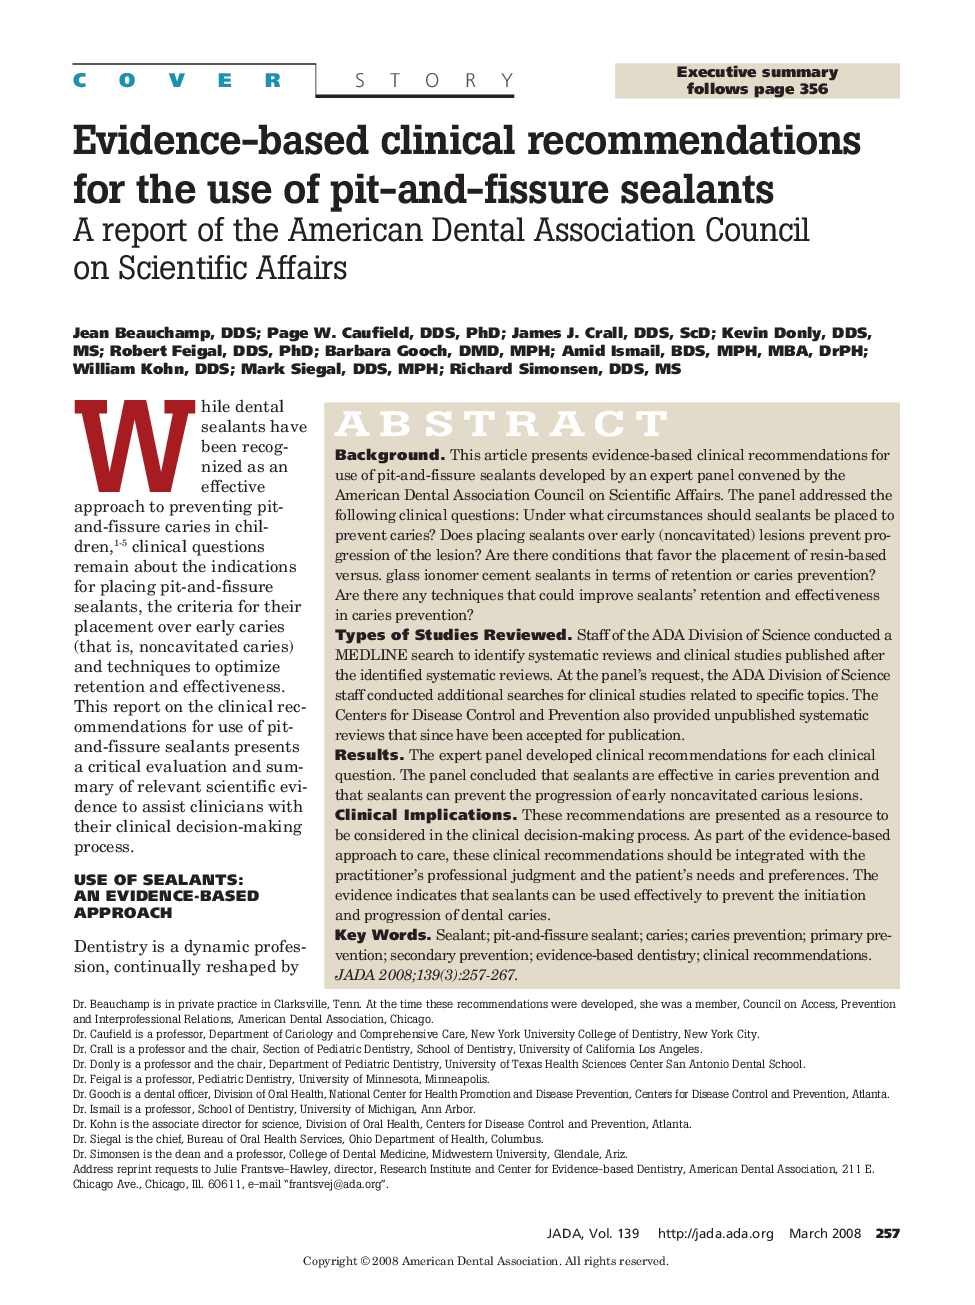 Evidence-Based Clinical Recommendations for the Use of Pit-and-Fissure Sealants : A Report of the American Dental Association Council on Scientific Affairs